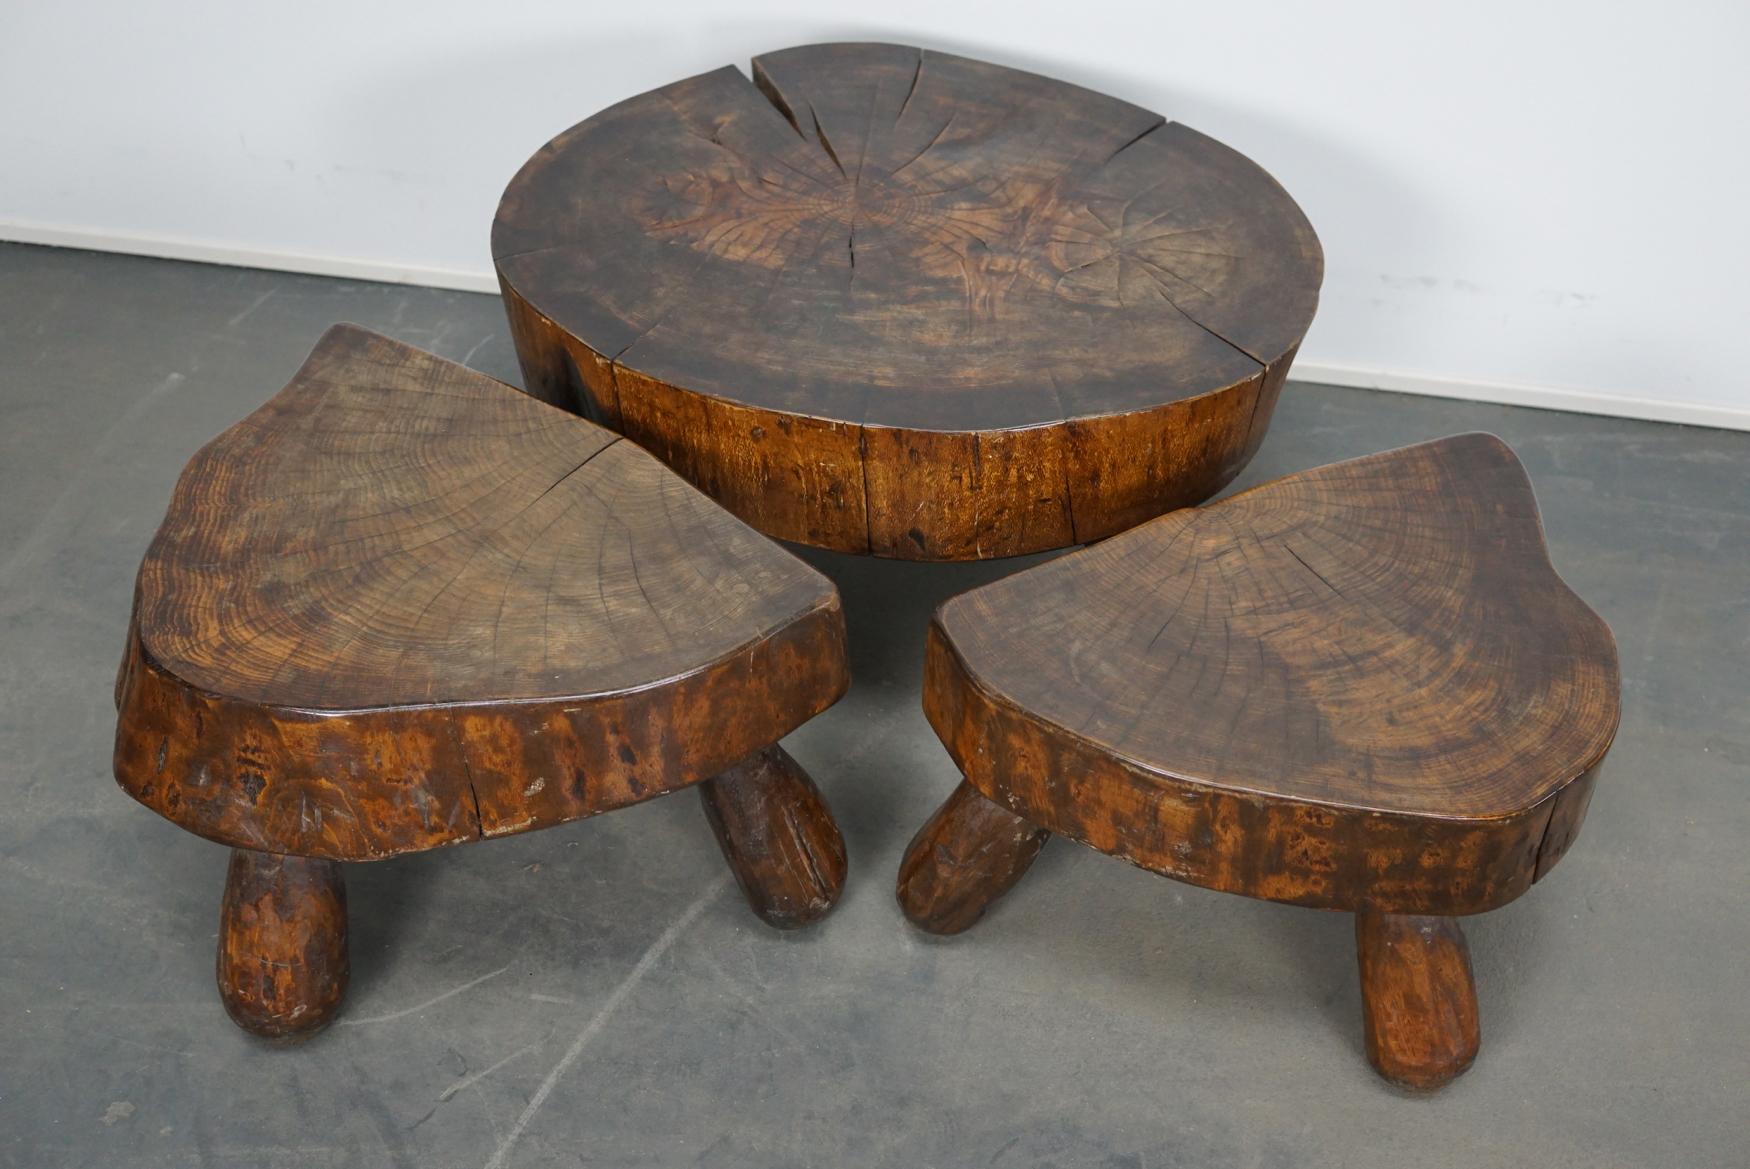 Amazing set of three polished walnut coffee tables. They were made circa 1970s in France from logs of a very old walnut tree. These decorative tables have retained a rich patina over the years. The measurements are: large table DWH 53 x 67 x 37 cm